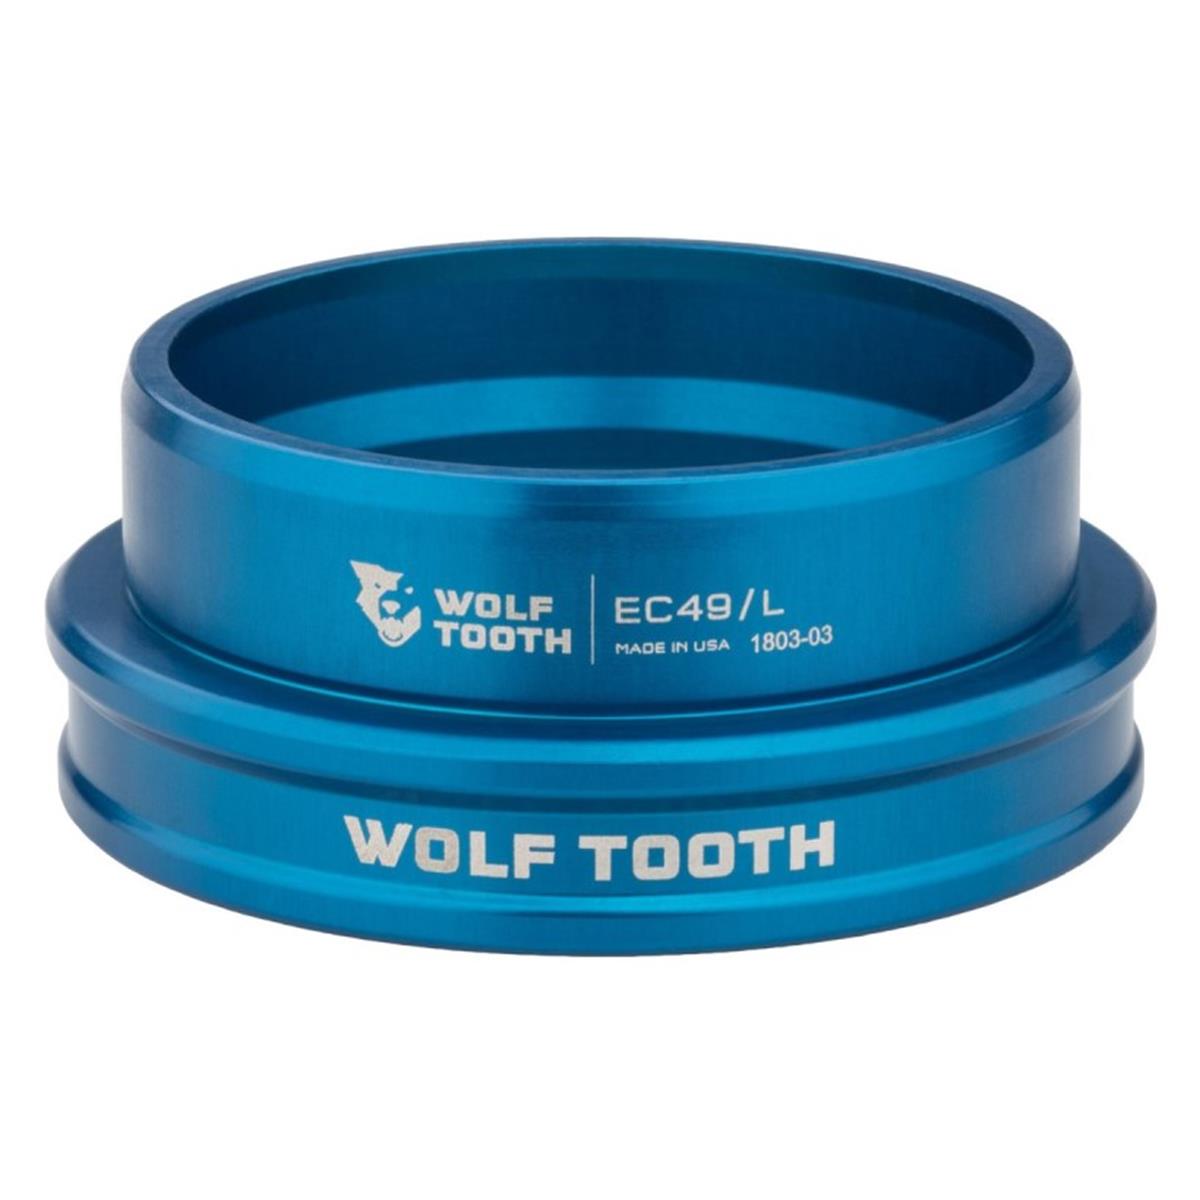 Headset wolf tooth  Direccion Inferior Ext. Ec49/40 